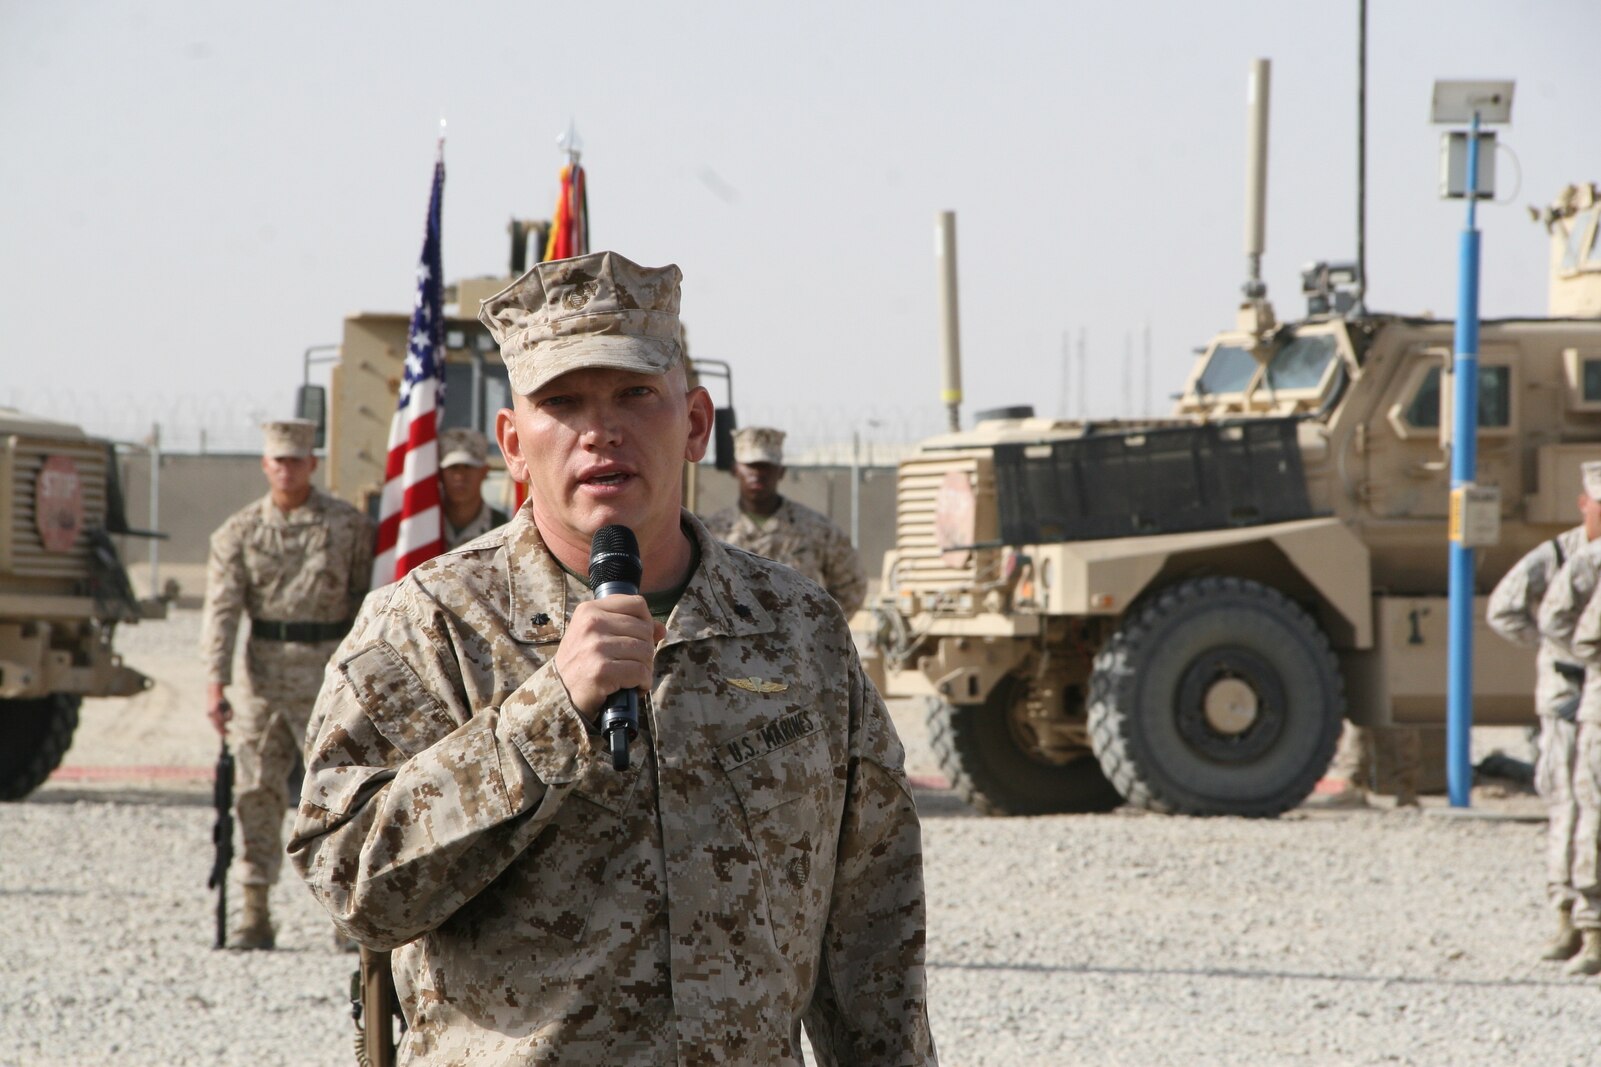 Lt. Col. Sid R. Welch, commanding officer, Combat Logistics Battalion 7, addresses guests during a transfer of authority ceremony held aboard Camp Leatherneck, Helmand province, Afghanistan, Aug. 1, 2014. Combat Logistics Battalion 7 was replaced by CLB-1 as the last unit to aid Regional Command (Southwest) with tactical-level logistical support. Combat Logistics Battalion 1 will close out another chapter in Marine Corps history as the last unit to serve as the logistics combat element for RC(SW).